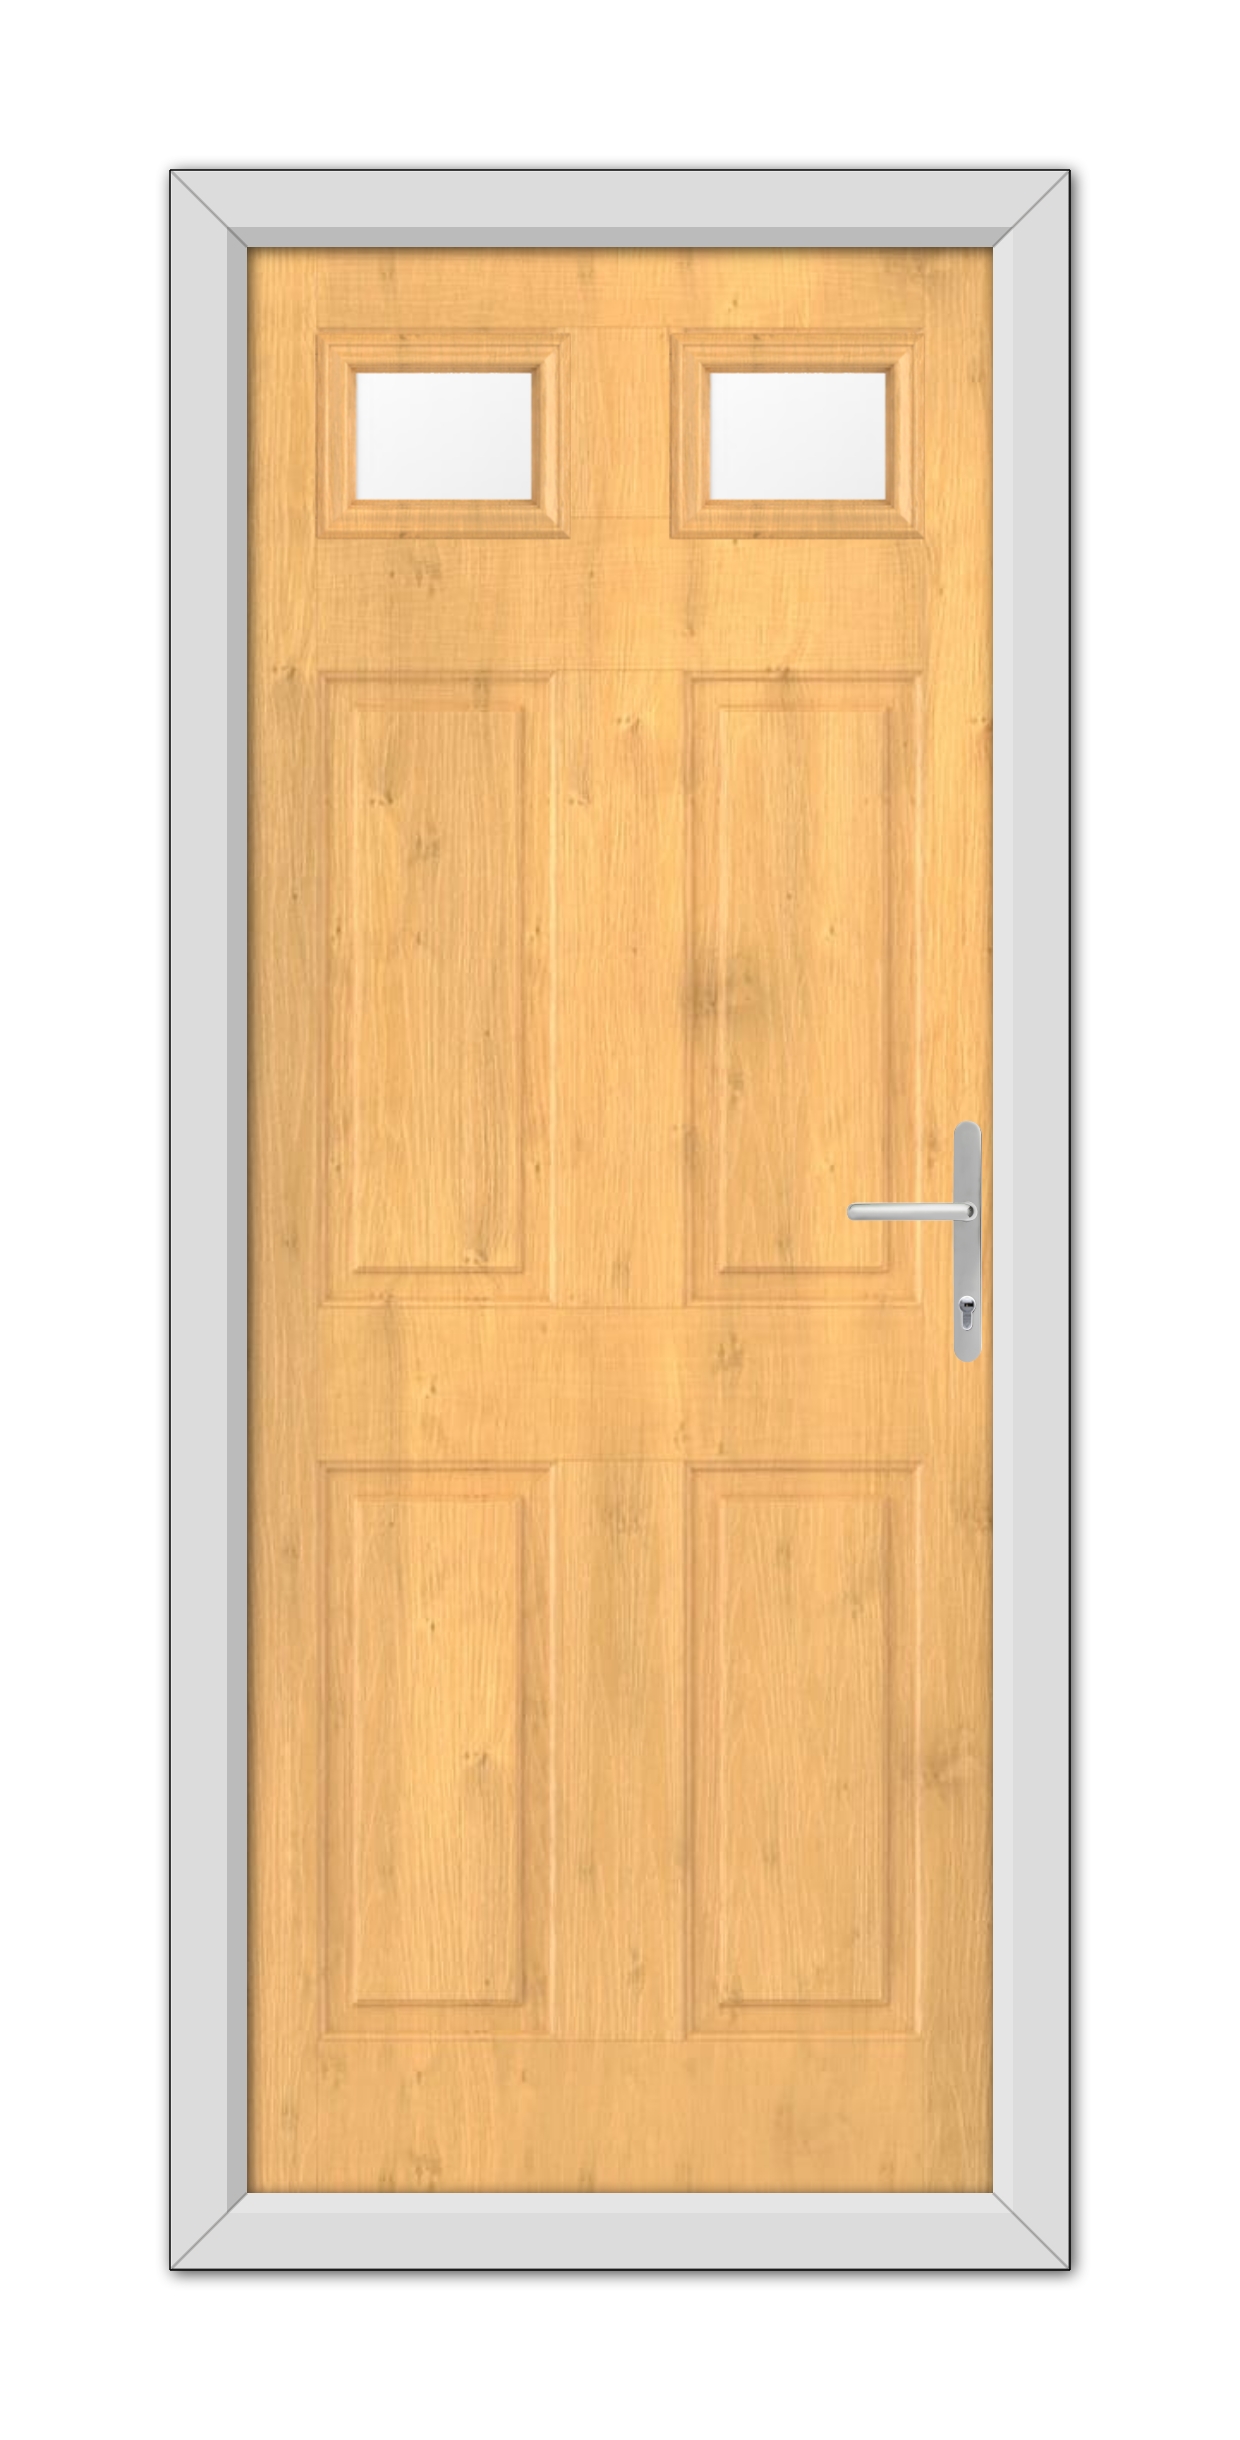 Irish Oak Middleton Glazed 2 Composite Door with a metal handle and two rectangular windows, framed by a gray casing, viewed straight on.